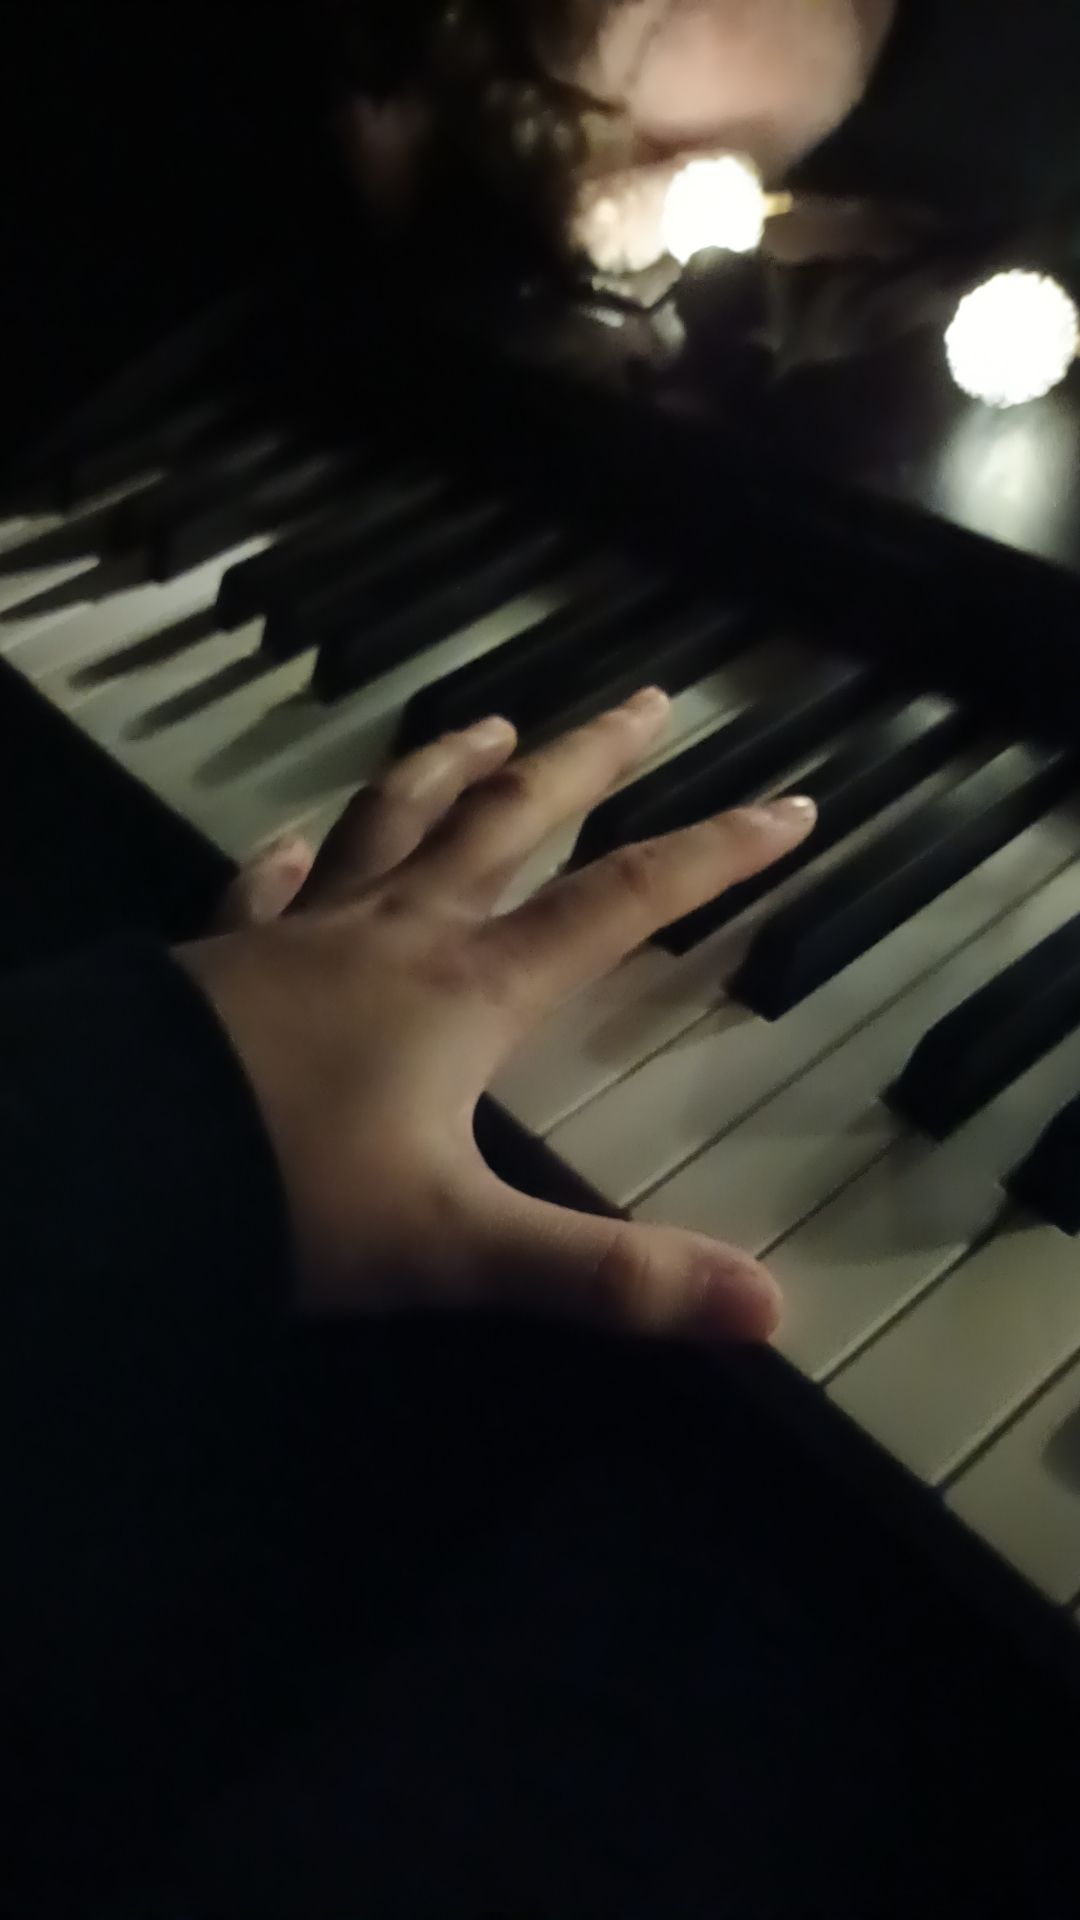 is my octave position acceptable or terrible (as in injuries)